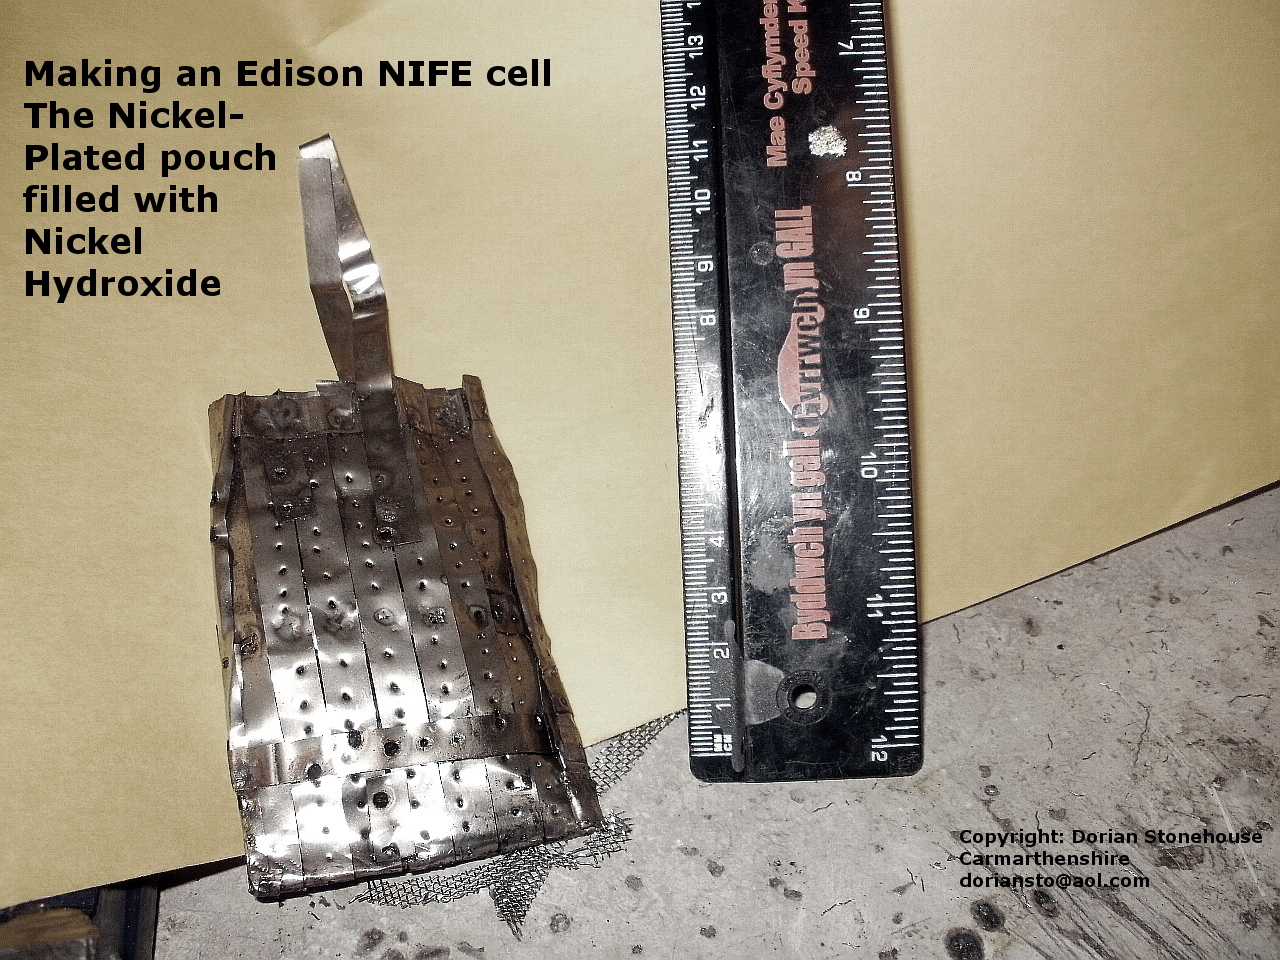 The nickel pocket is about 4 inches long